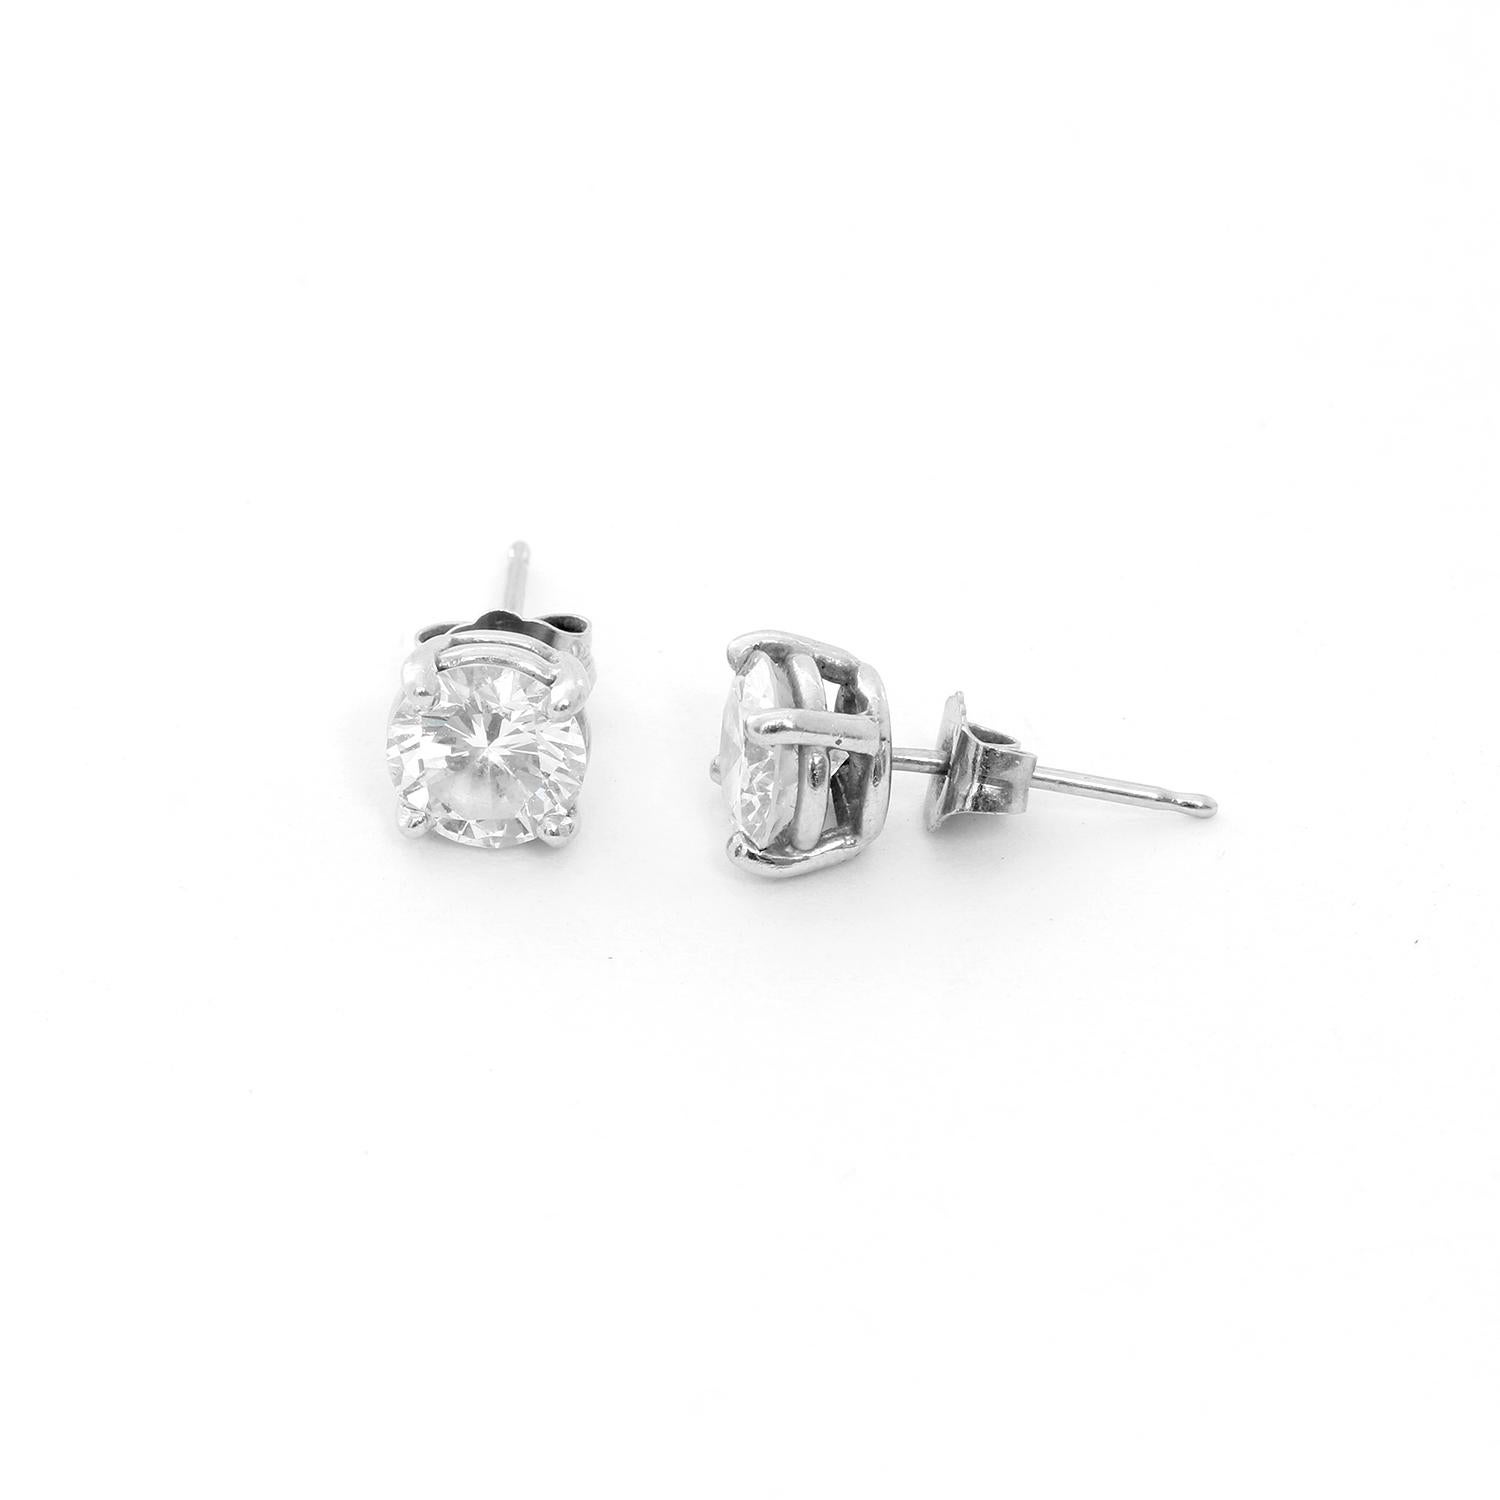 14K White Gold Diamond Studs  - Pair of diamond studs weighing .95 cts  with F color and VS-2 clarity and the other weighing .97 cts with G color and VS-2 clarity set in a handmade prong. Comes with a valuation from Christies Auction House.